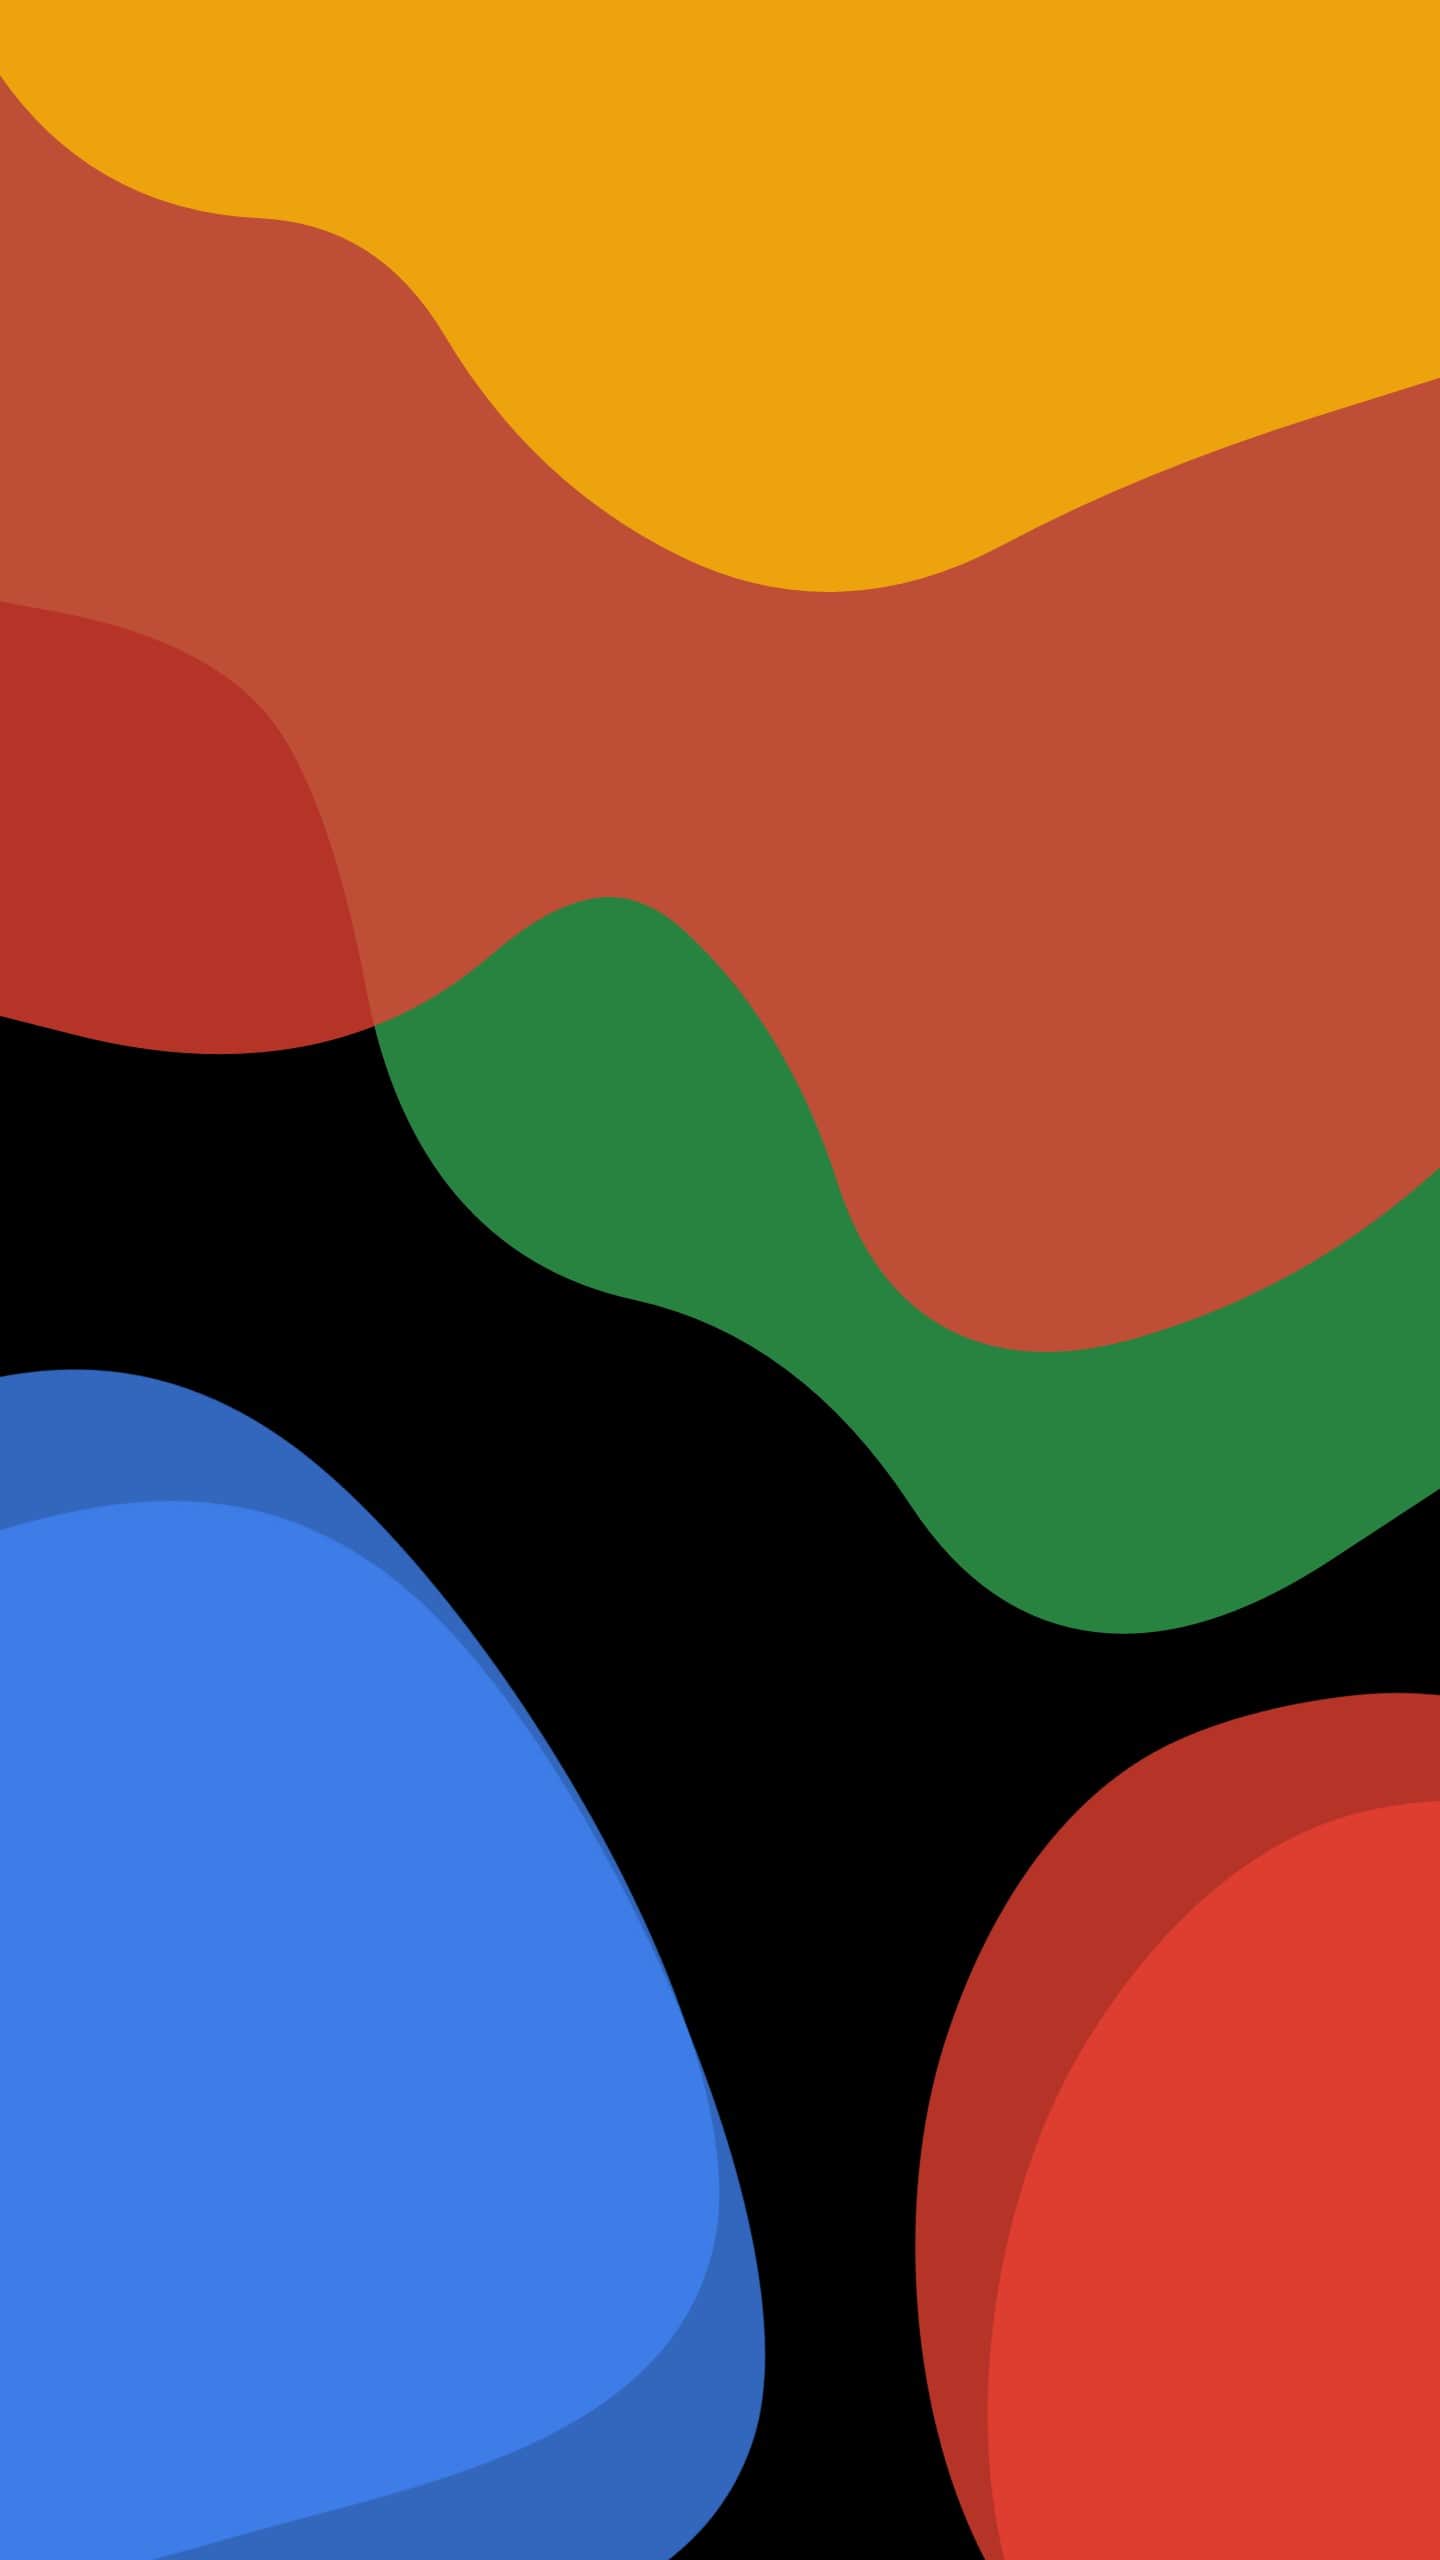 Google Pixel 5 Wallpaper Download, Here Are The Official Pixel 5 Wallpaper Download 9to5google this article, you will be able to download the new wallpaper for the new google